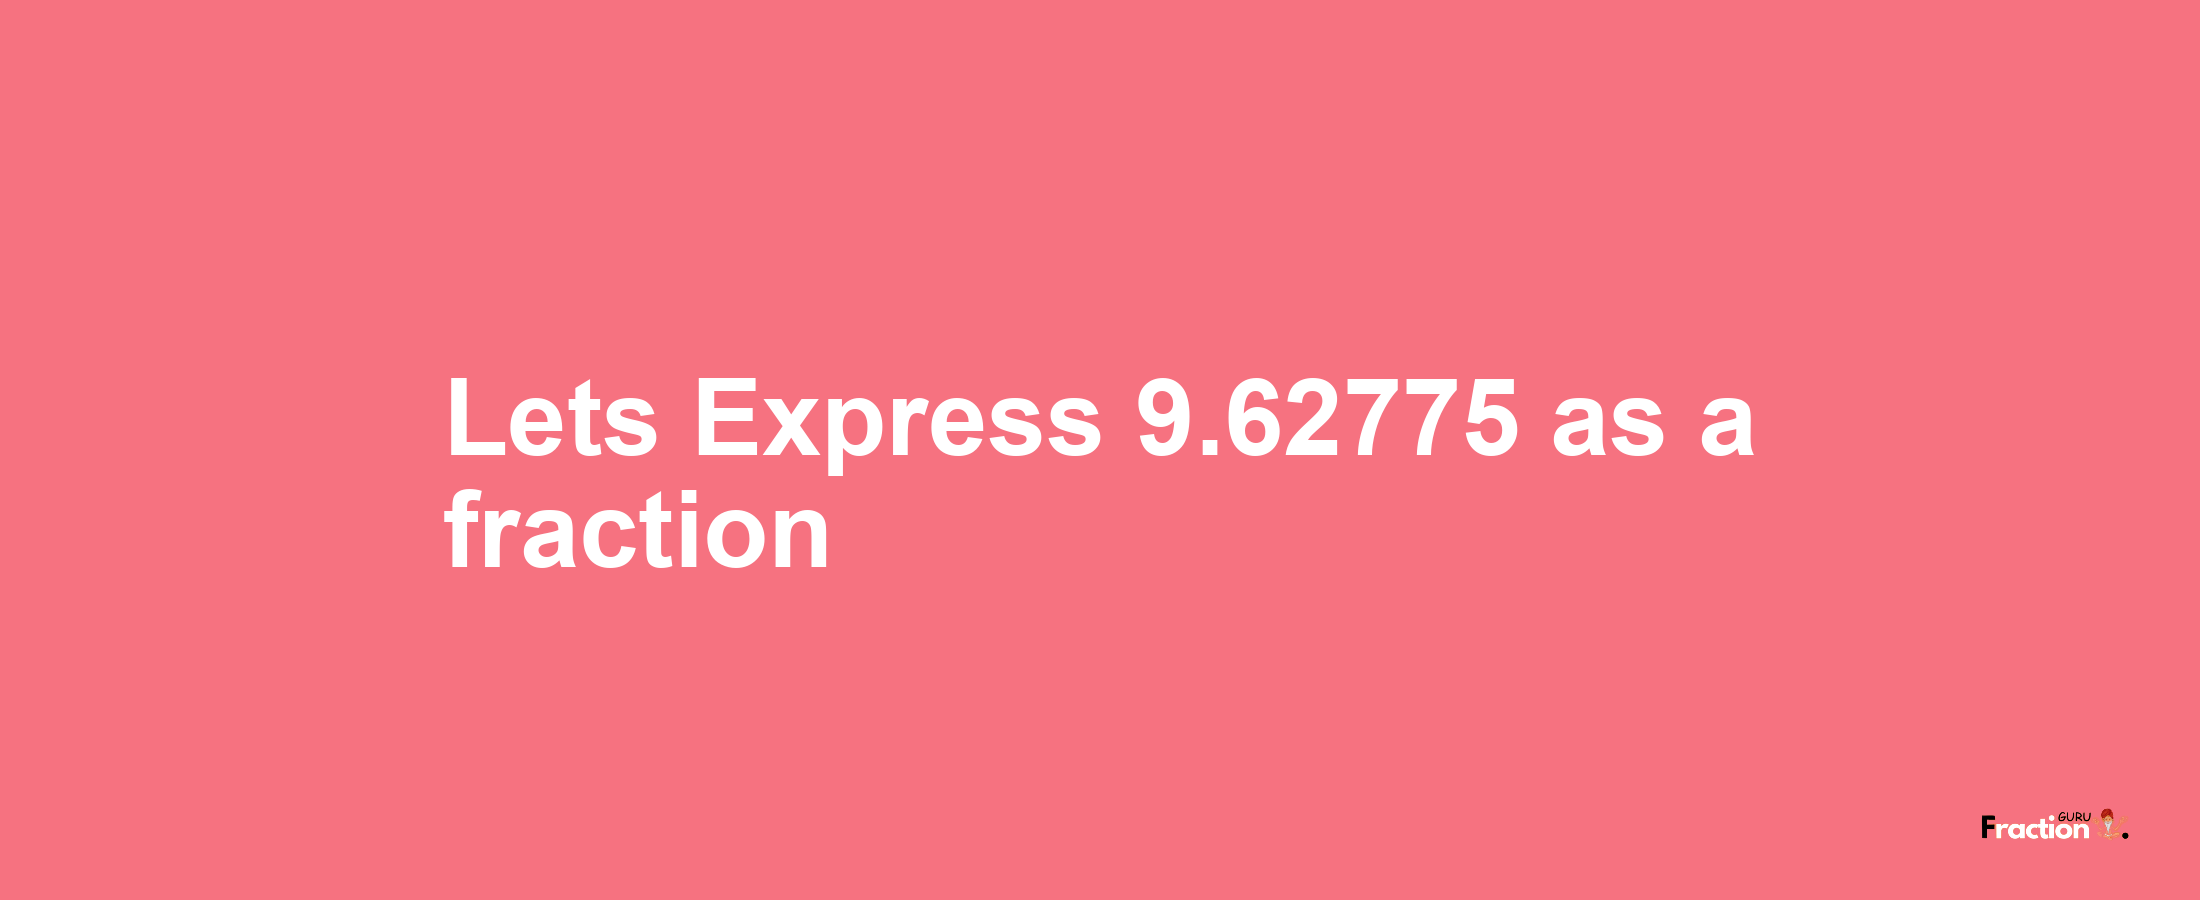 Lets Express 9.62775 as afraction